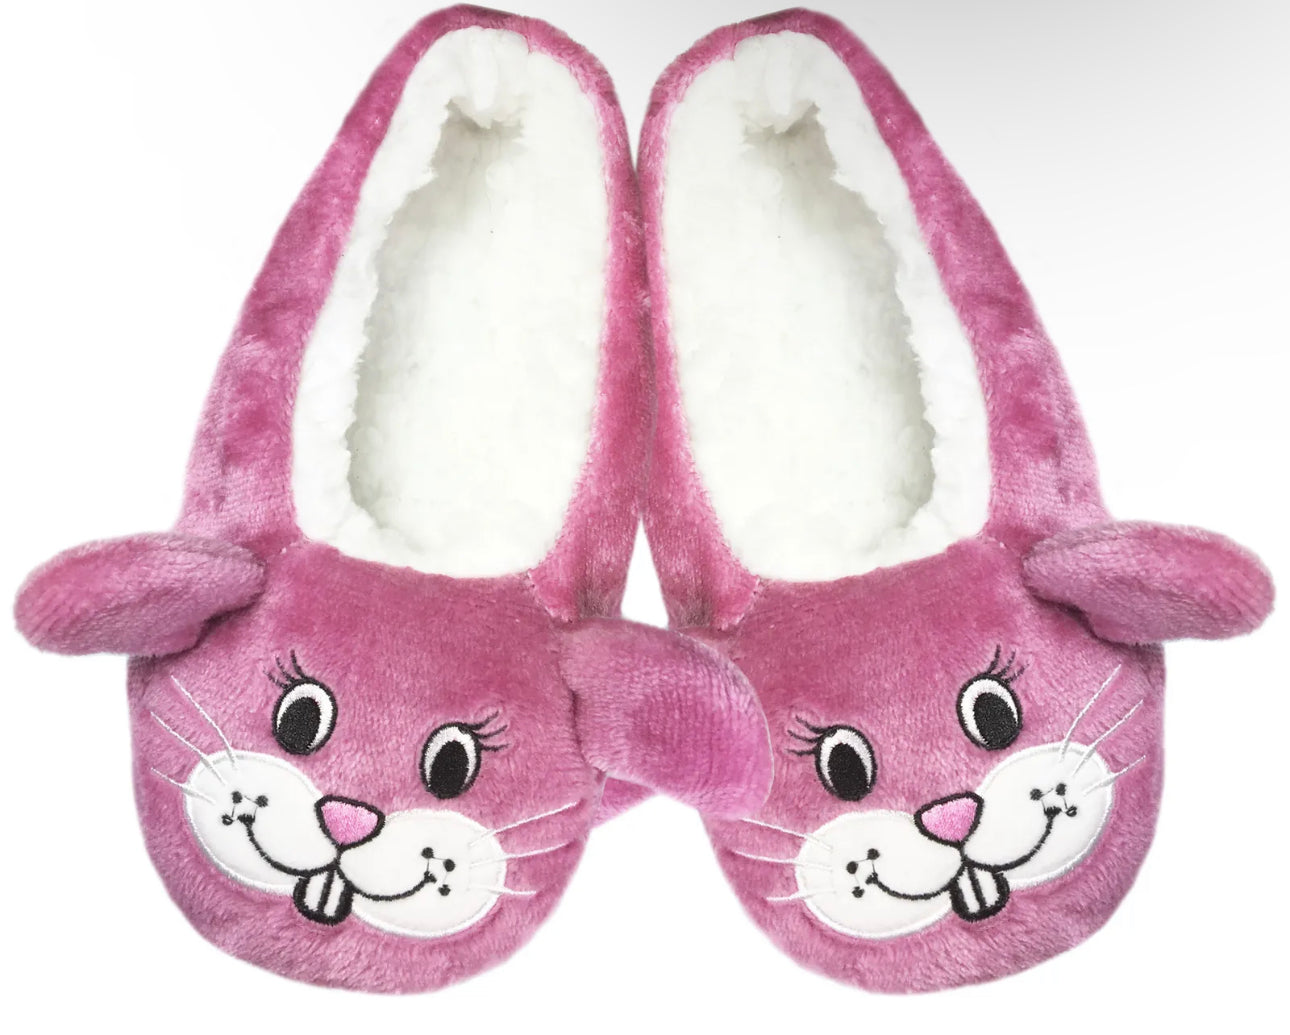 Ladies fun cosy novelty slippers